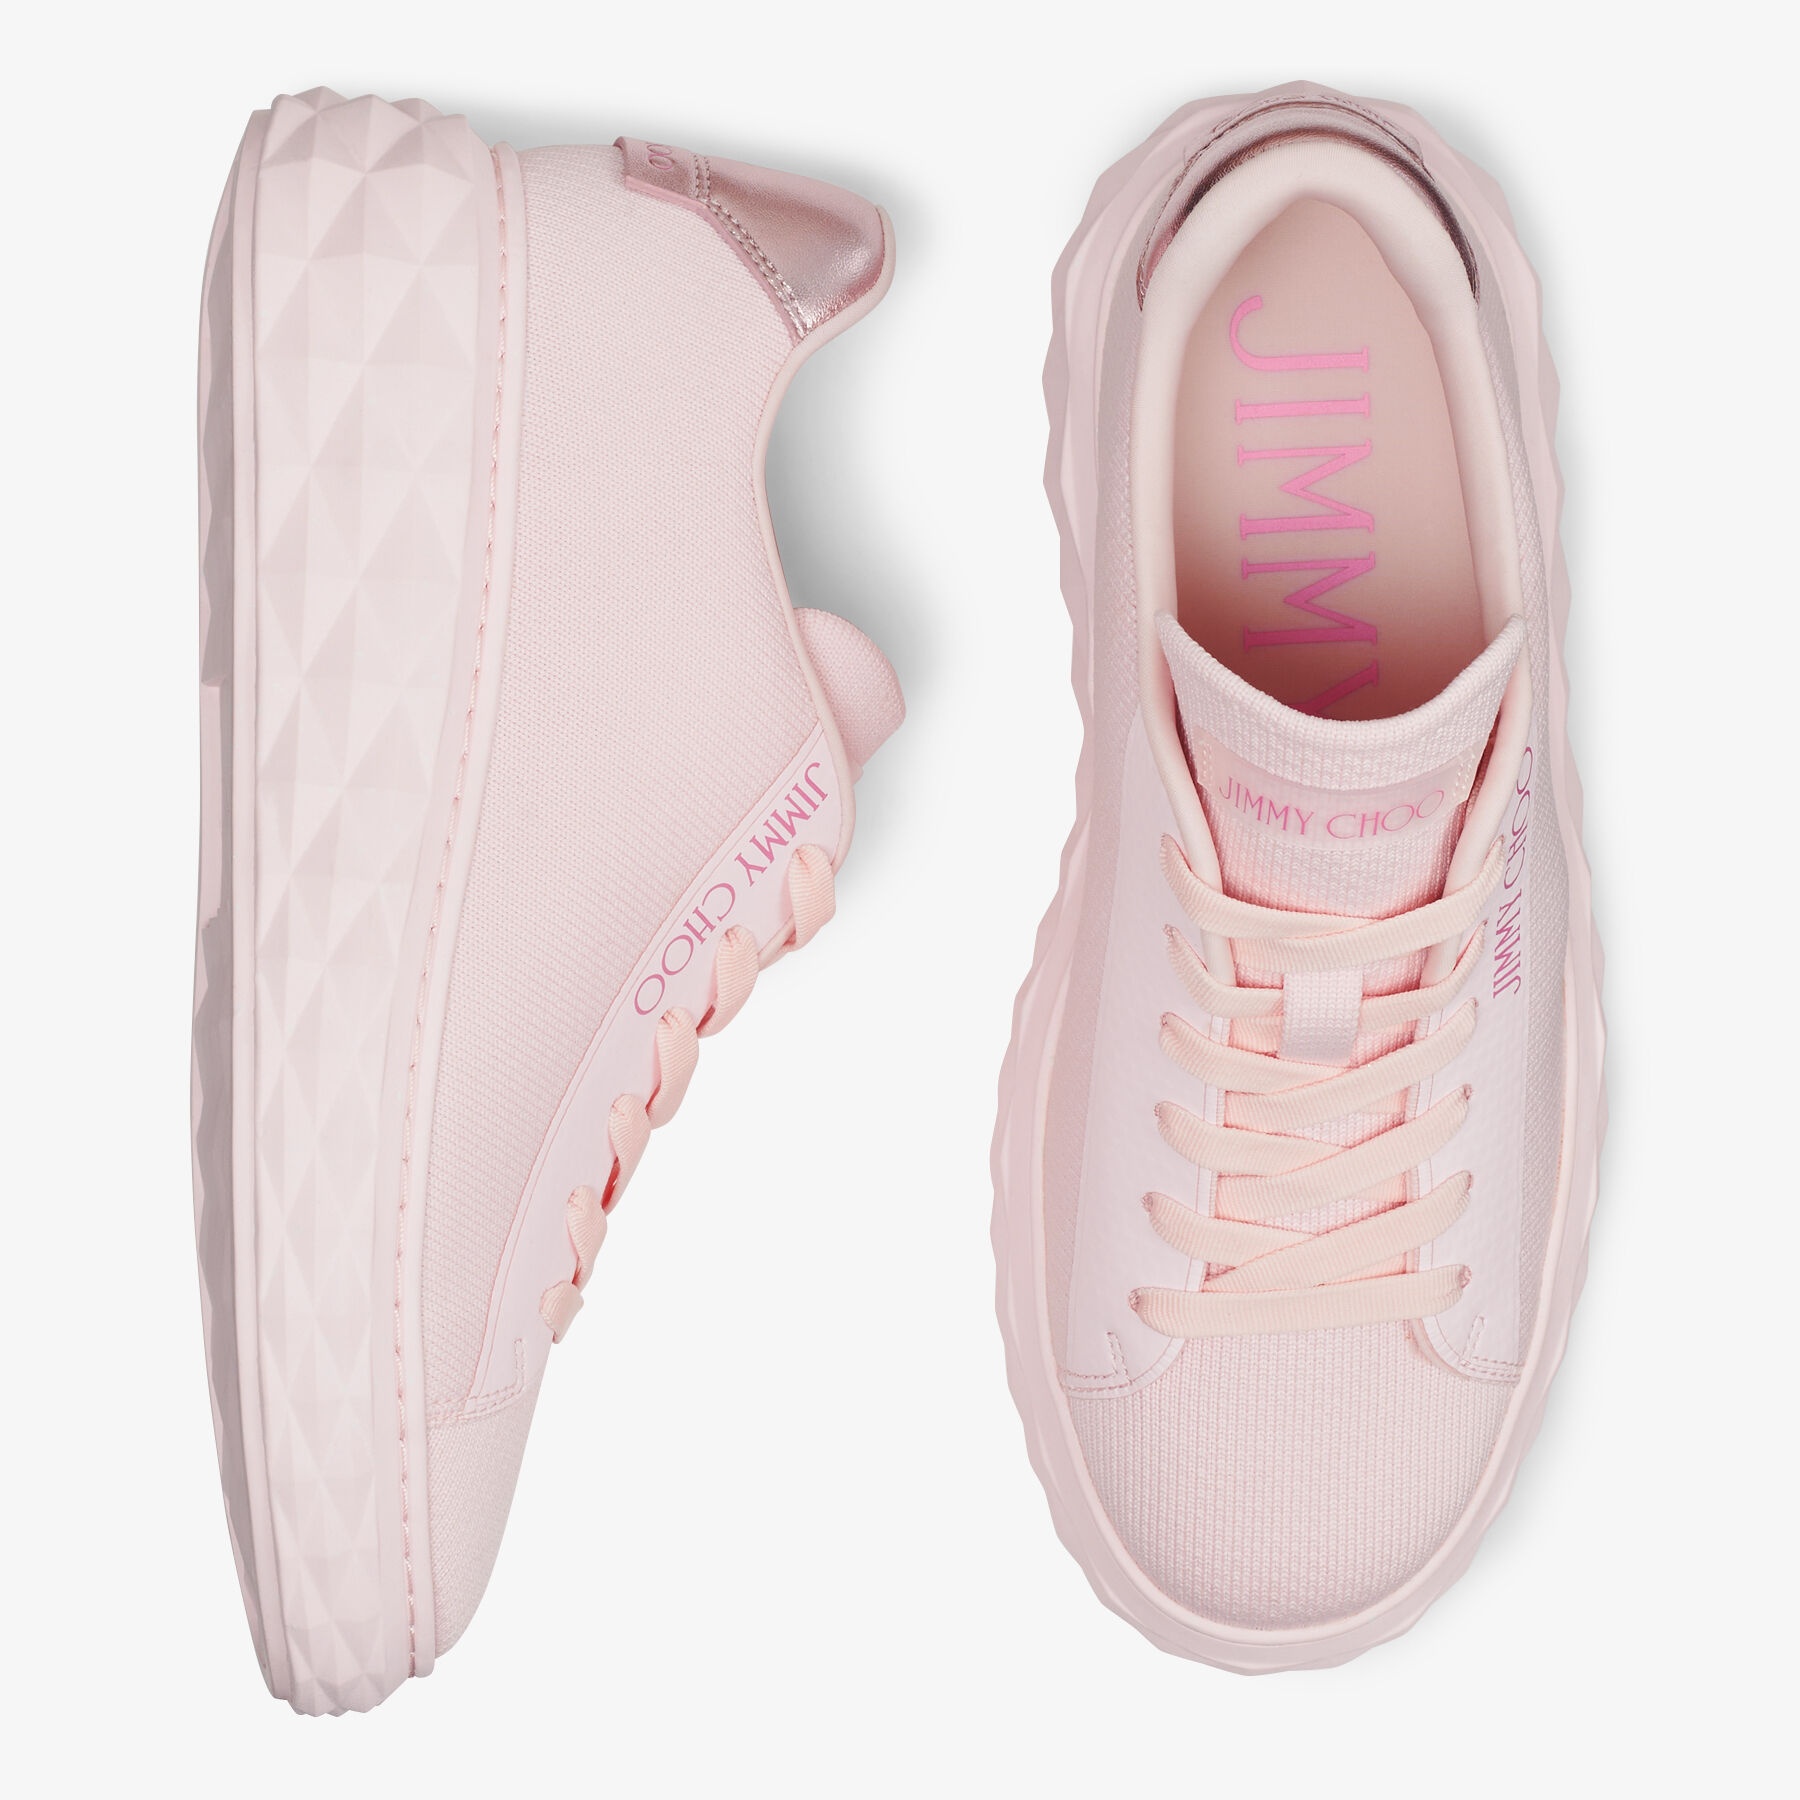 Diamond Light Maxi/f
Powder Pink Knit Low-Top Trainers with Platform Sole - 6